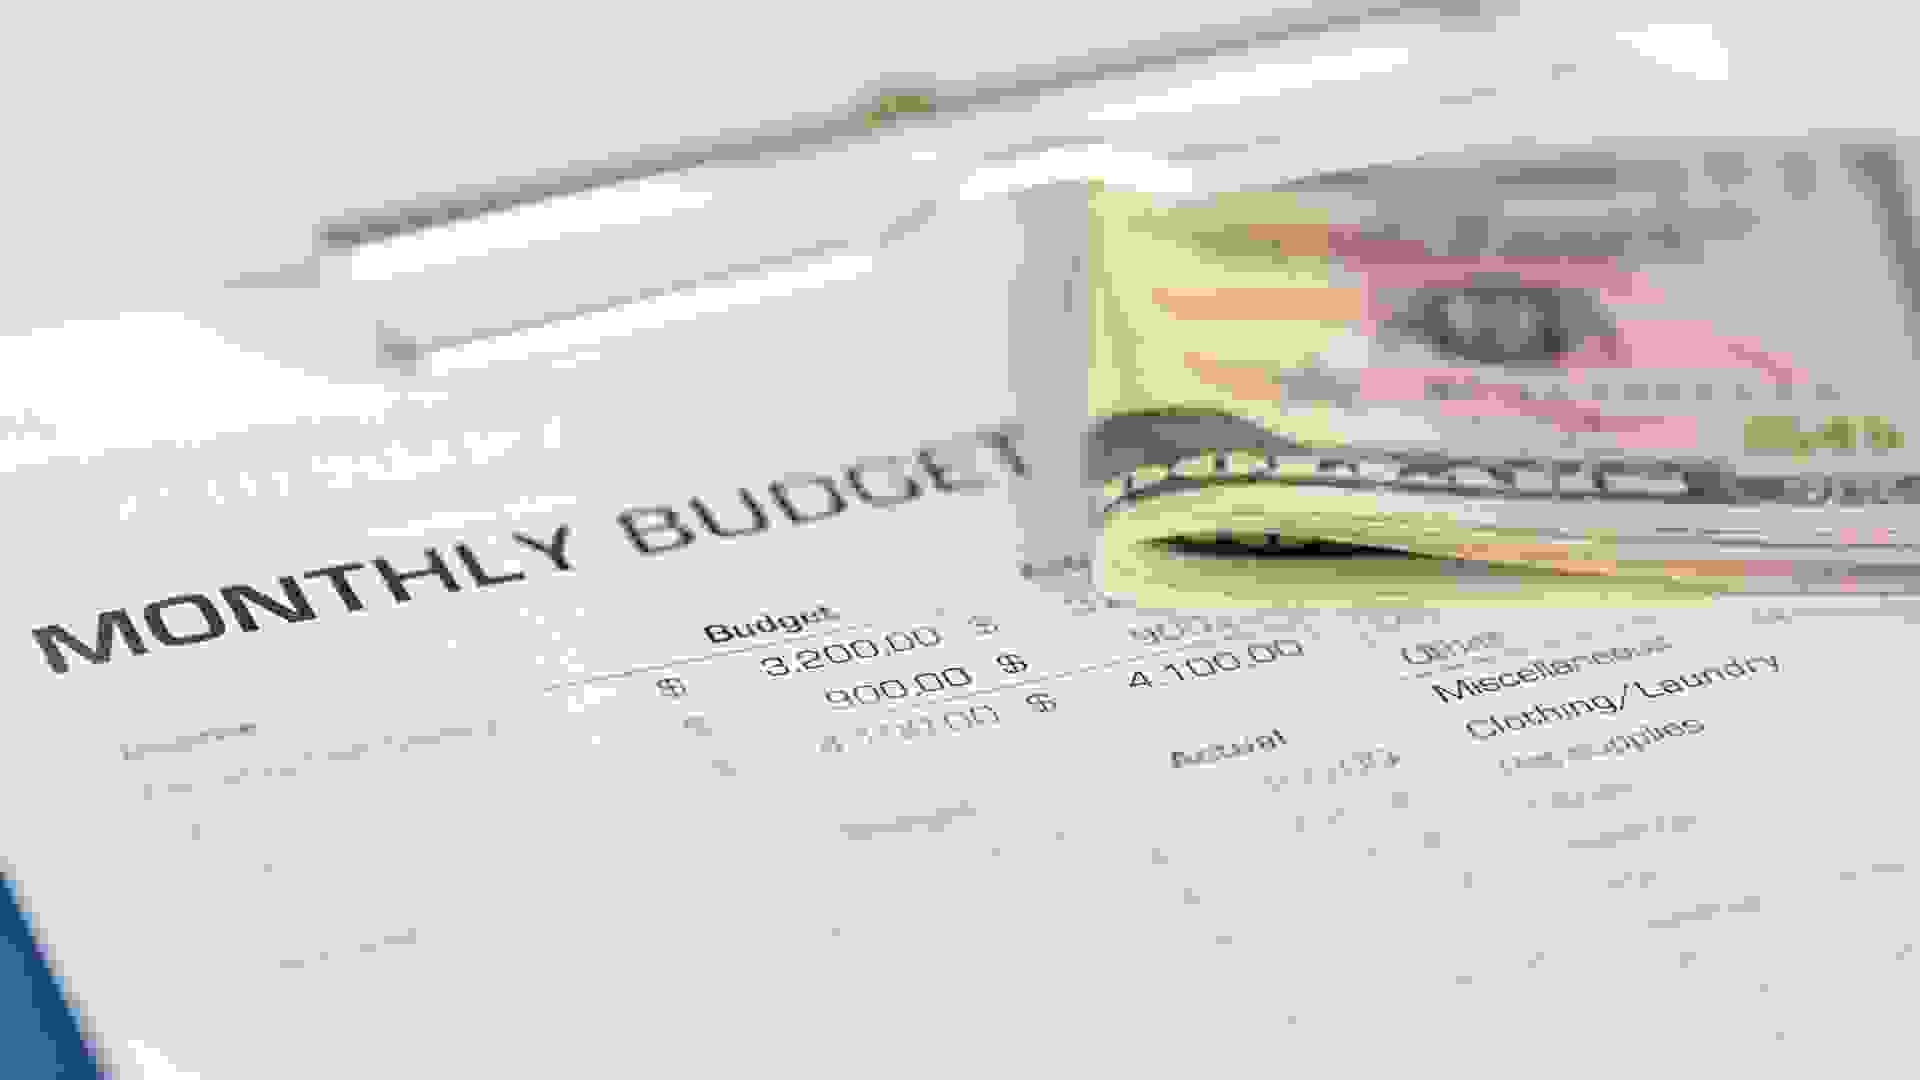 Monthly Budget Plan for Expenses and Money.